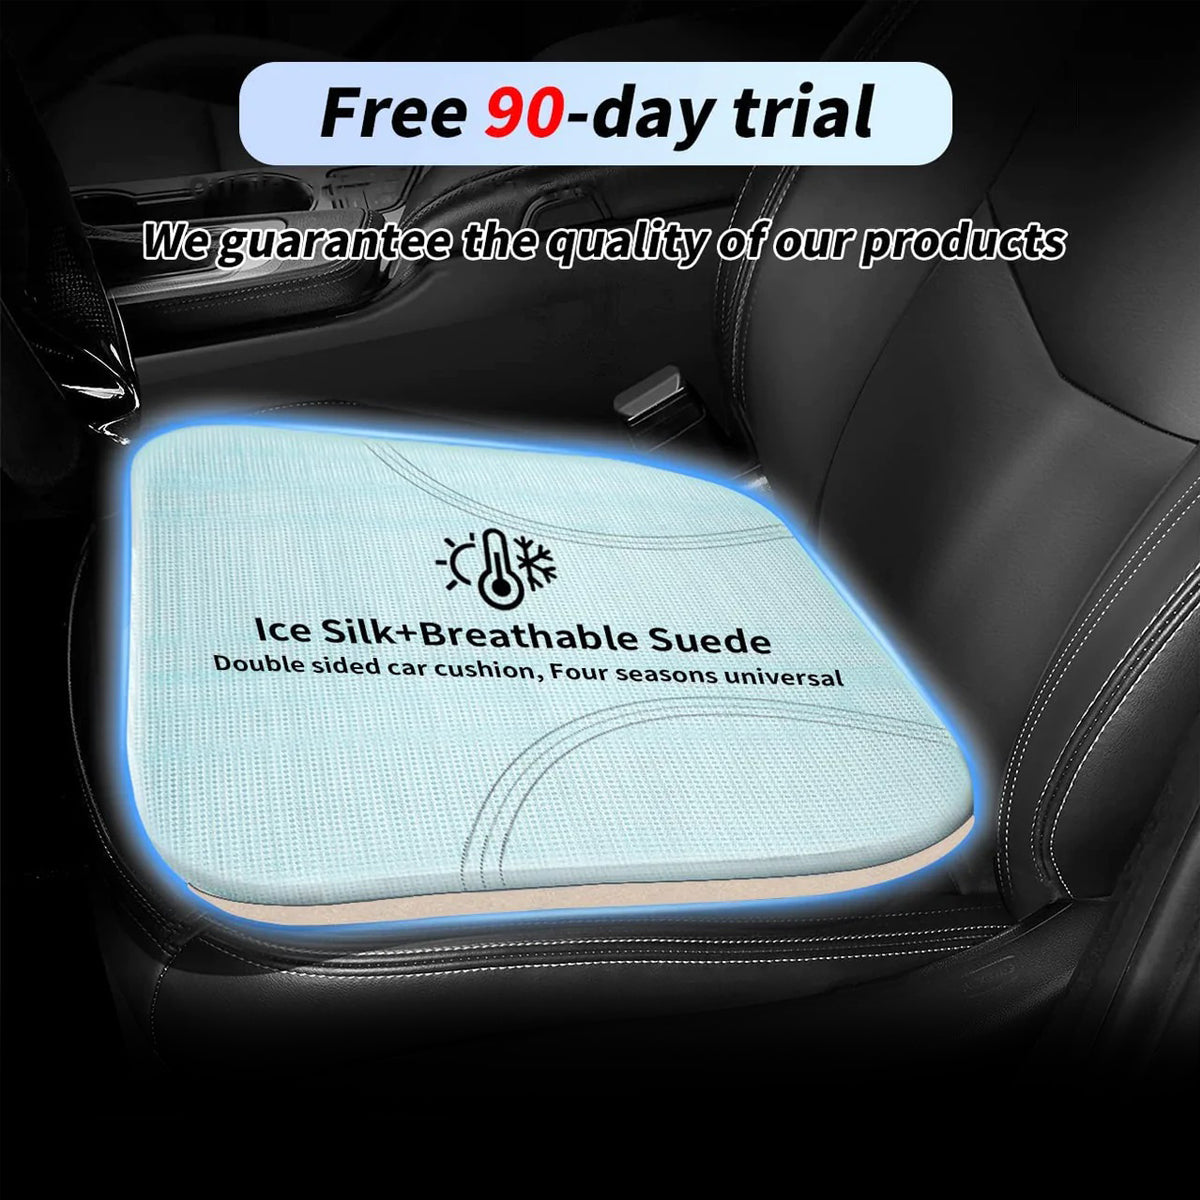 Delicate Leather Car Seat Cushion, Custom For Cars, Car Memory Foam Seat Cushion, Heightening Seat Cushion, Seat Cushion for Car and Office Chair LI19999 - Delicate Leather